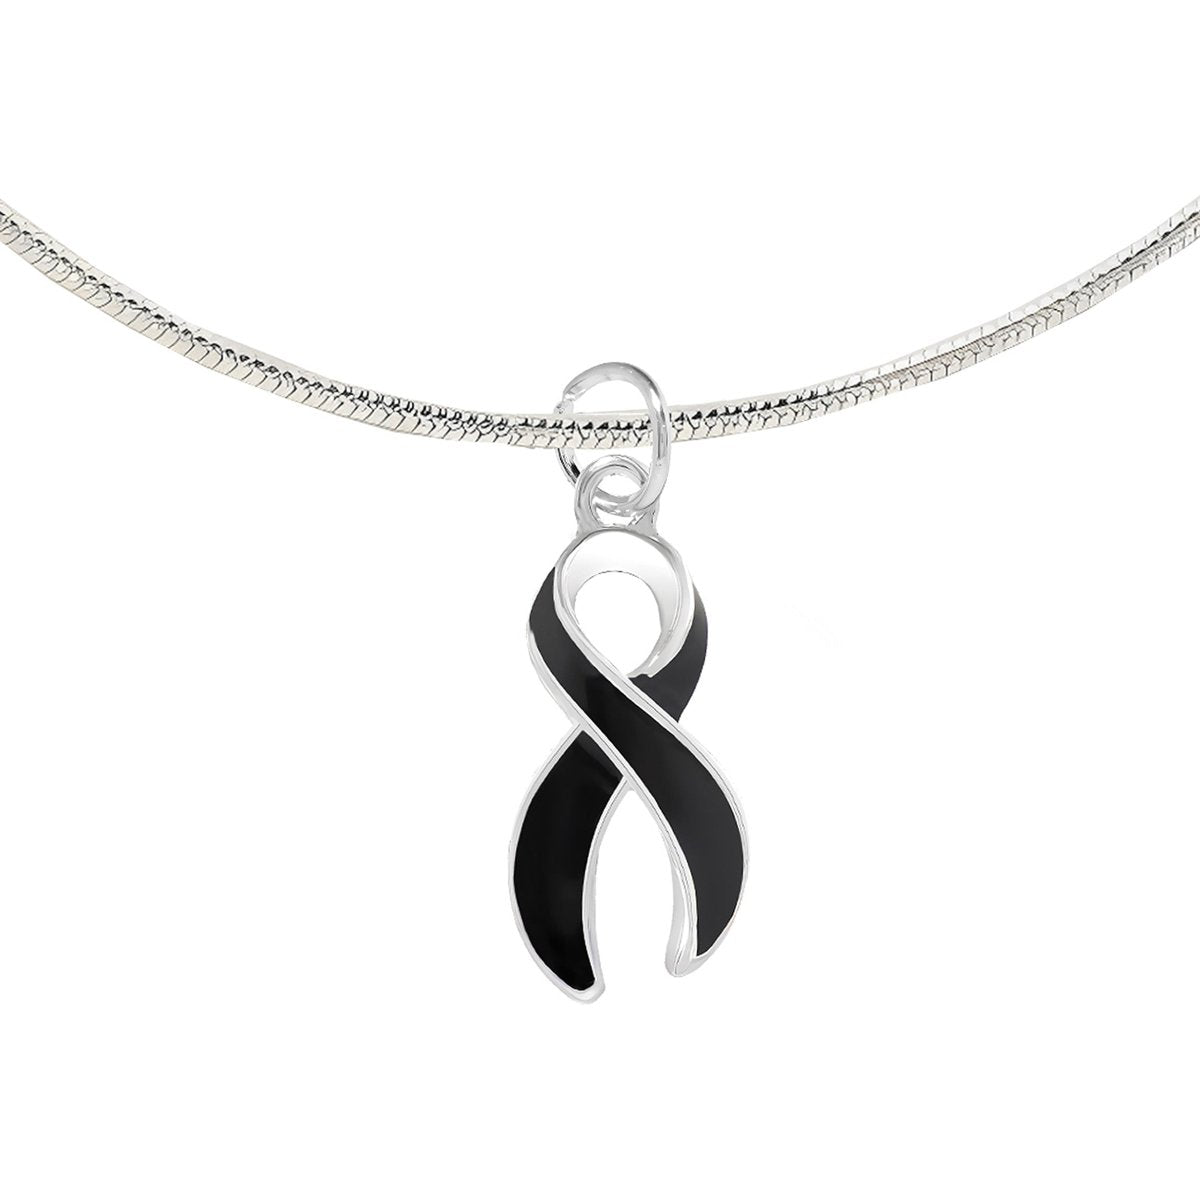 Large Black Ribbon Necklaces - Fundraising For A Cause